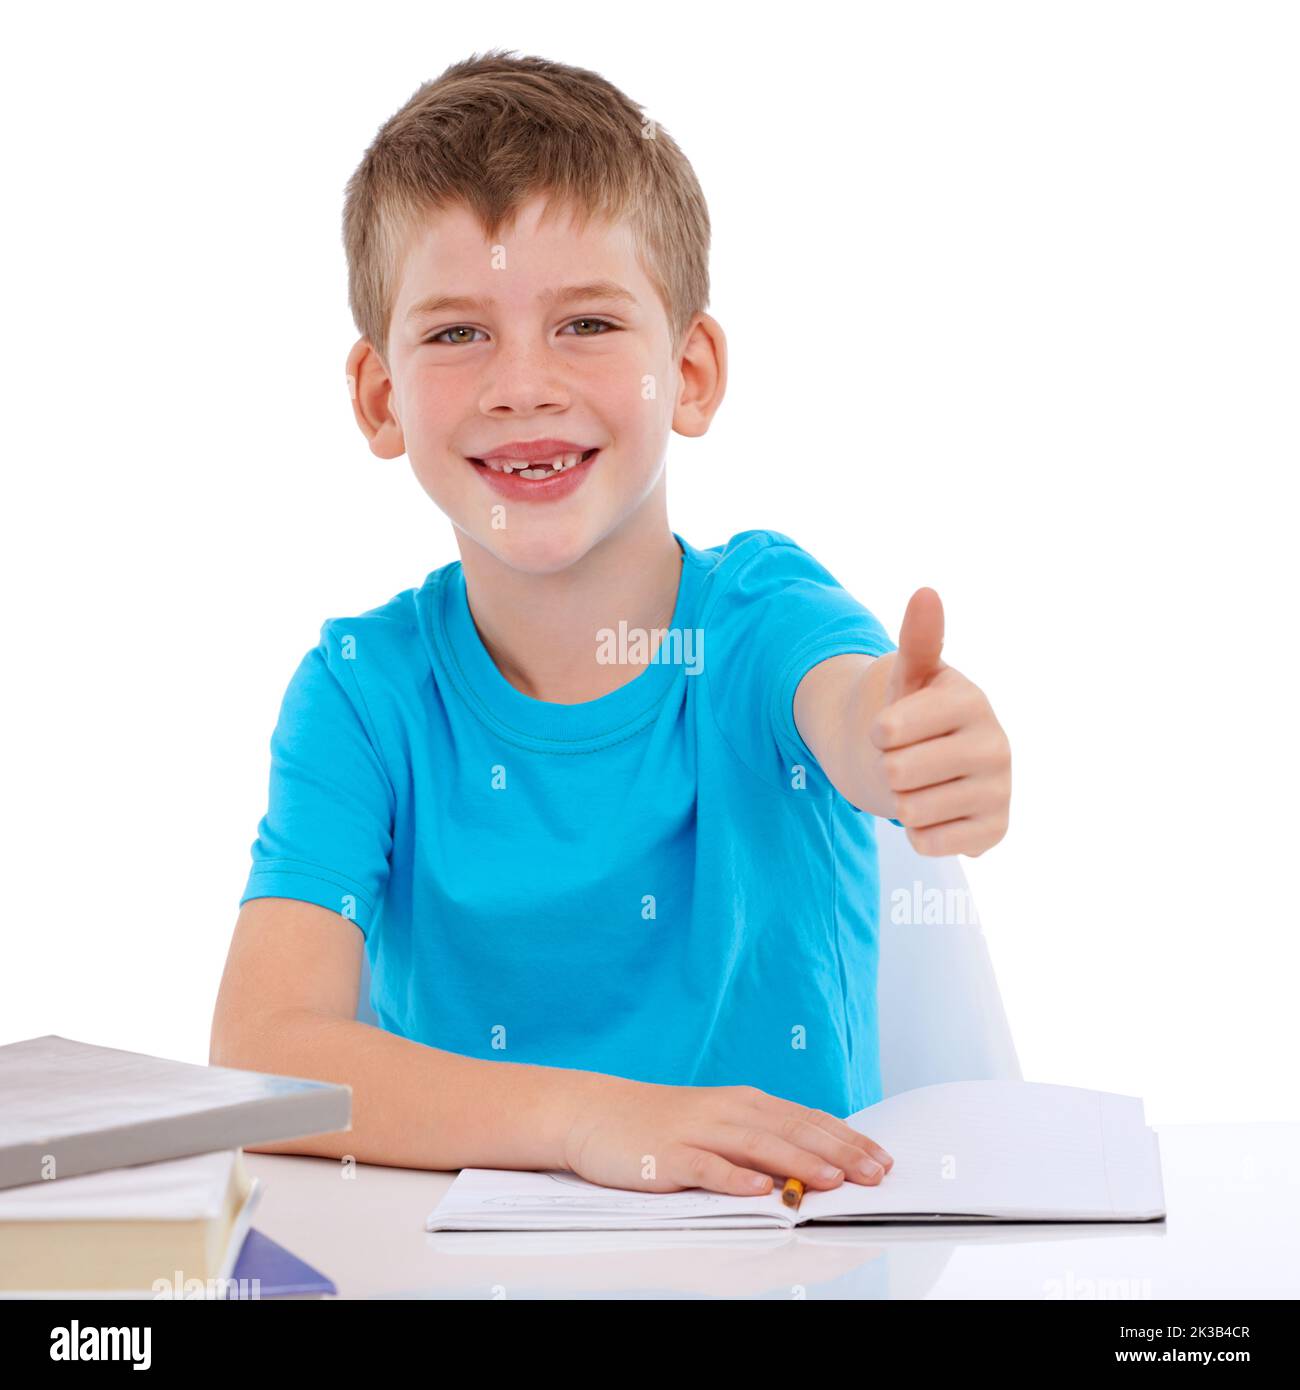 I like studying hard. Portrait of a young boy sitting with his homework holding a thumbs up sign. Stock Photo